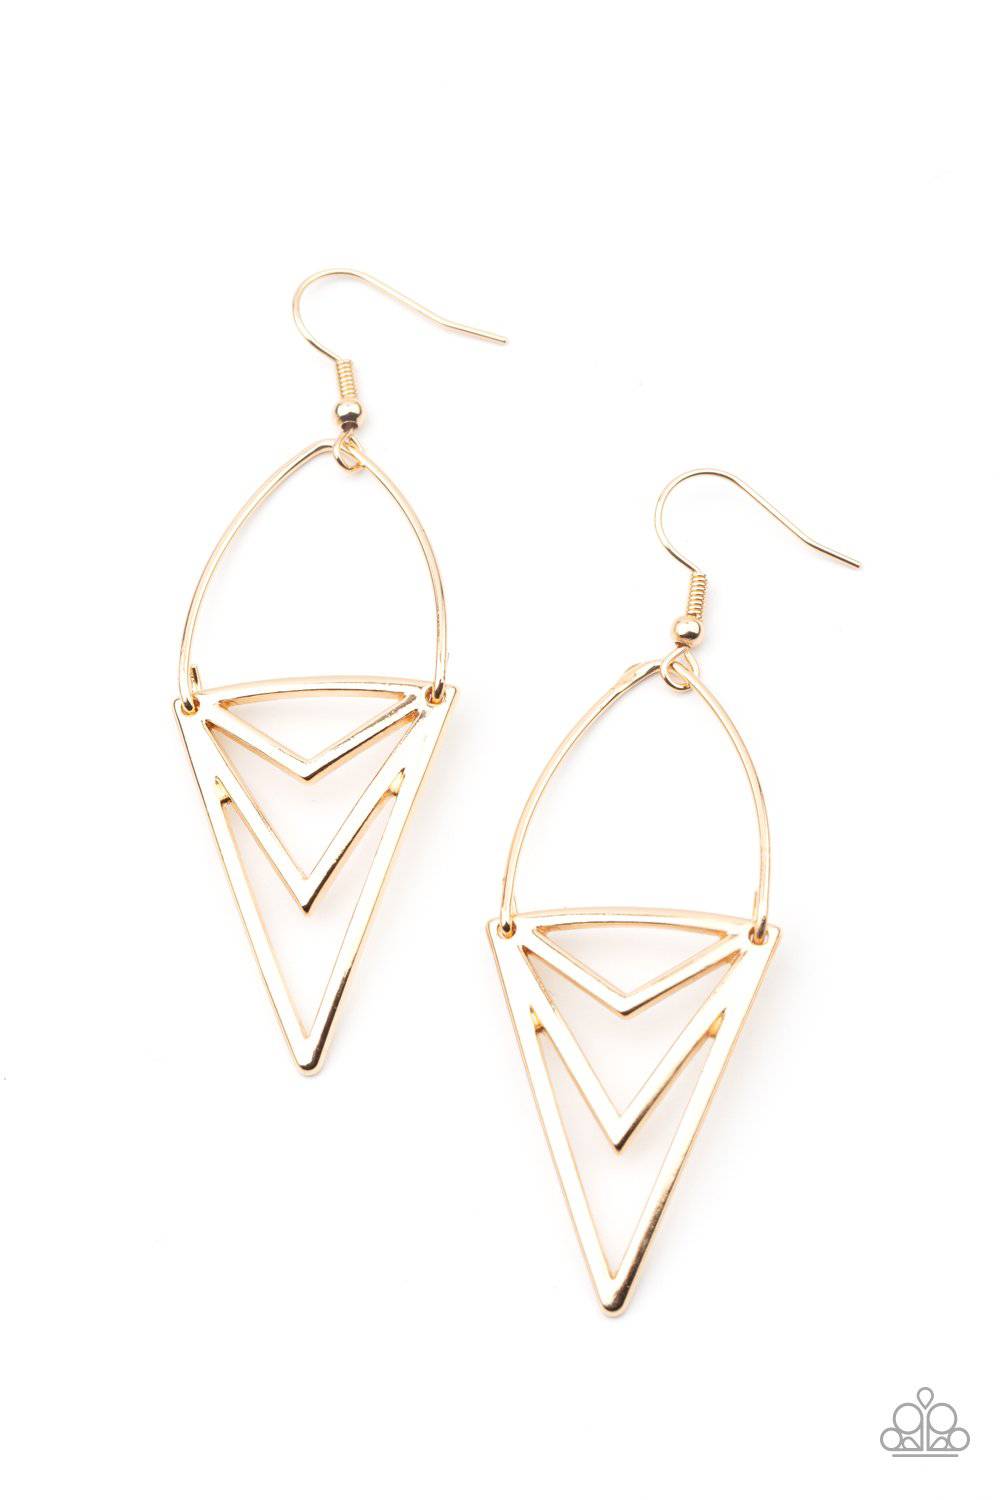 D376 - Proceed With Caution Earring by Paparazzi Accessories on Fancy5Fashion.com